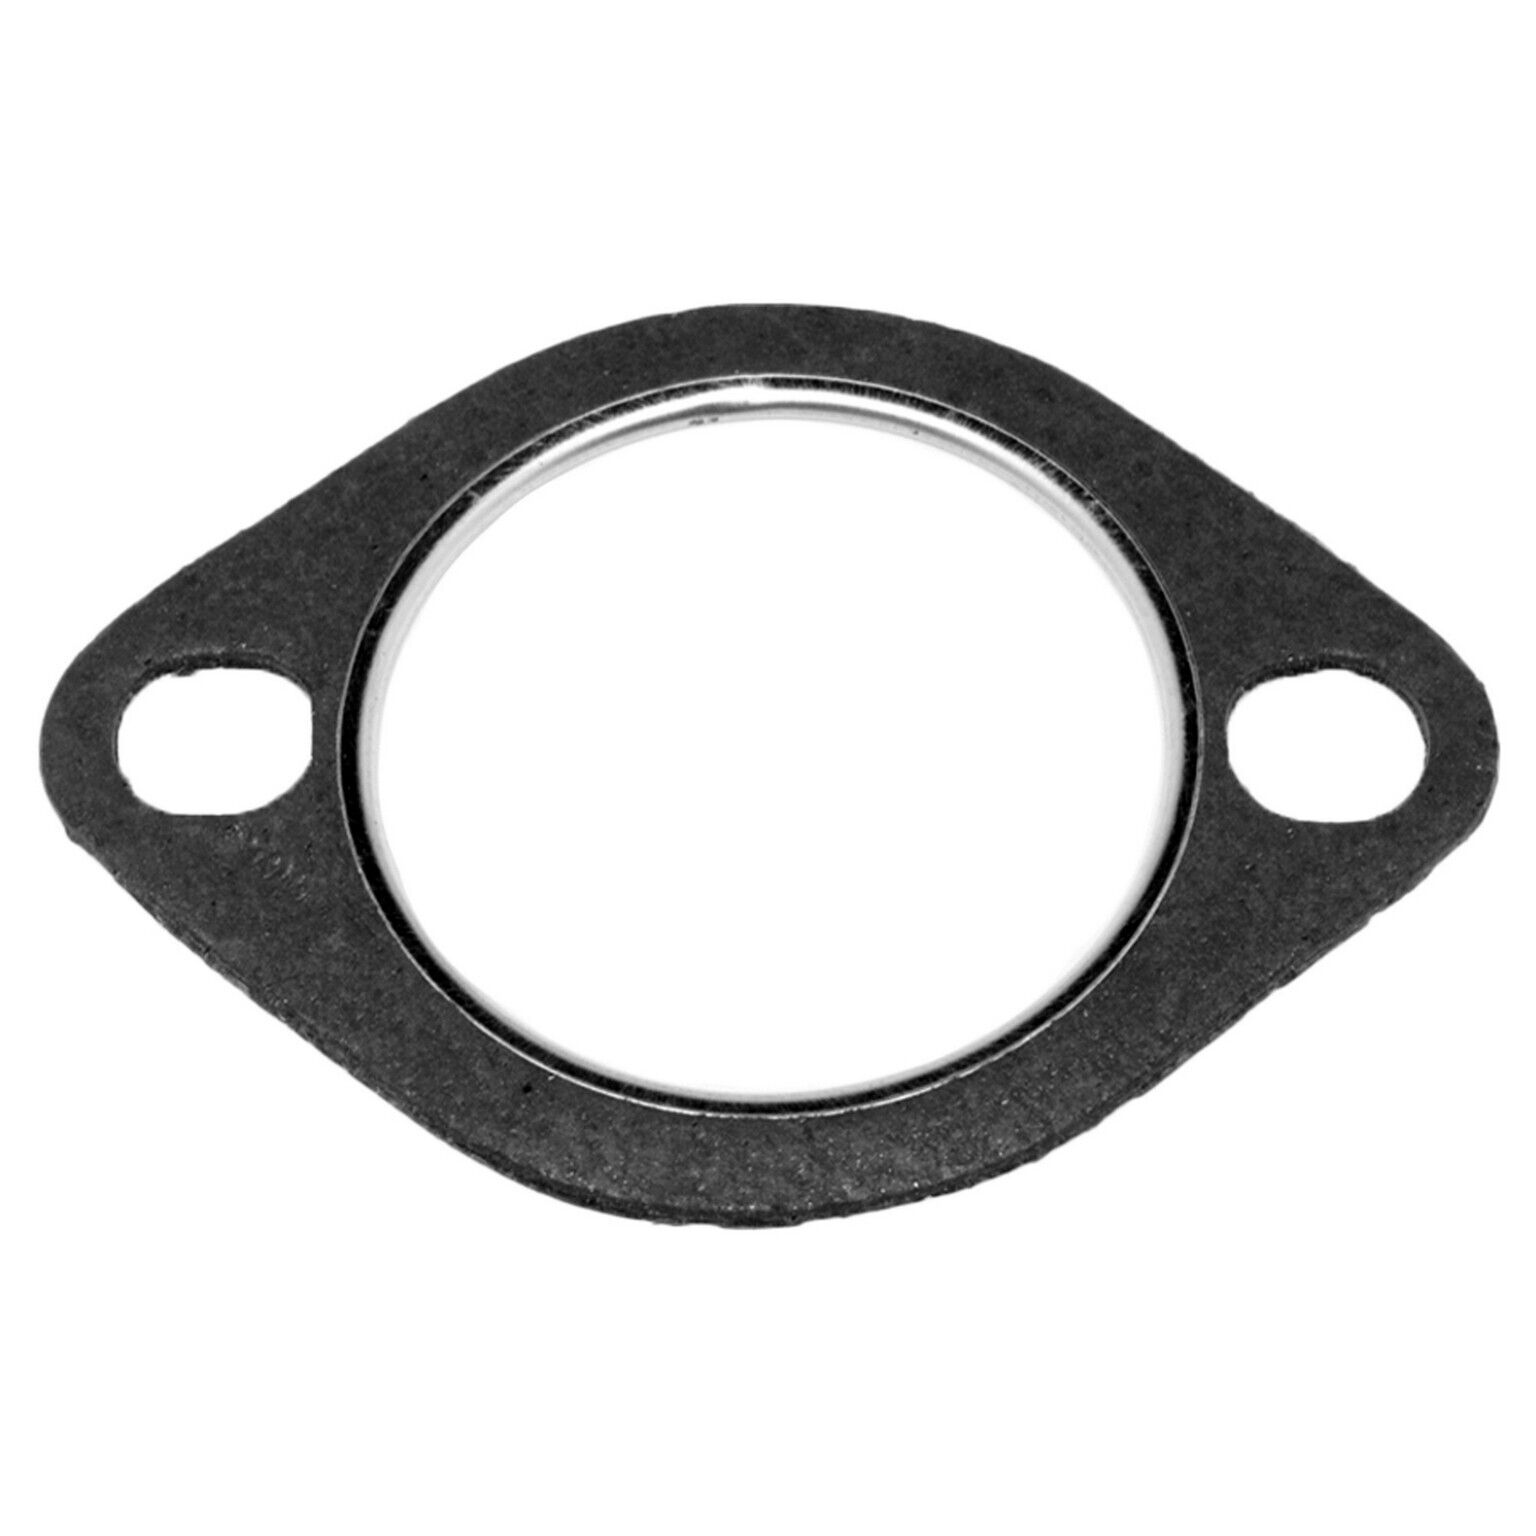 Exhaust Pipe Flange Gasket for Spectra, Sephia, 323, MX-3, Protege (31560)